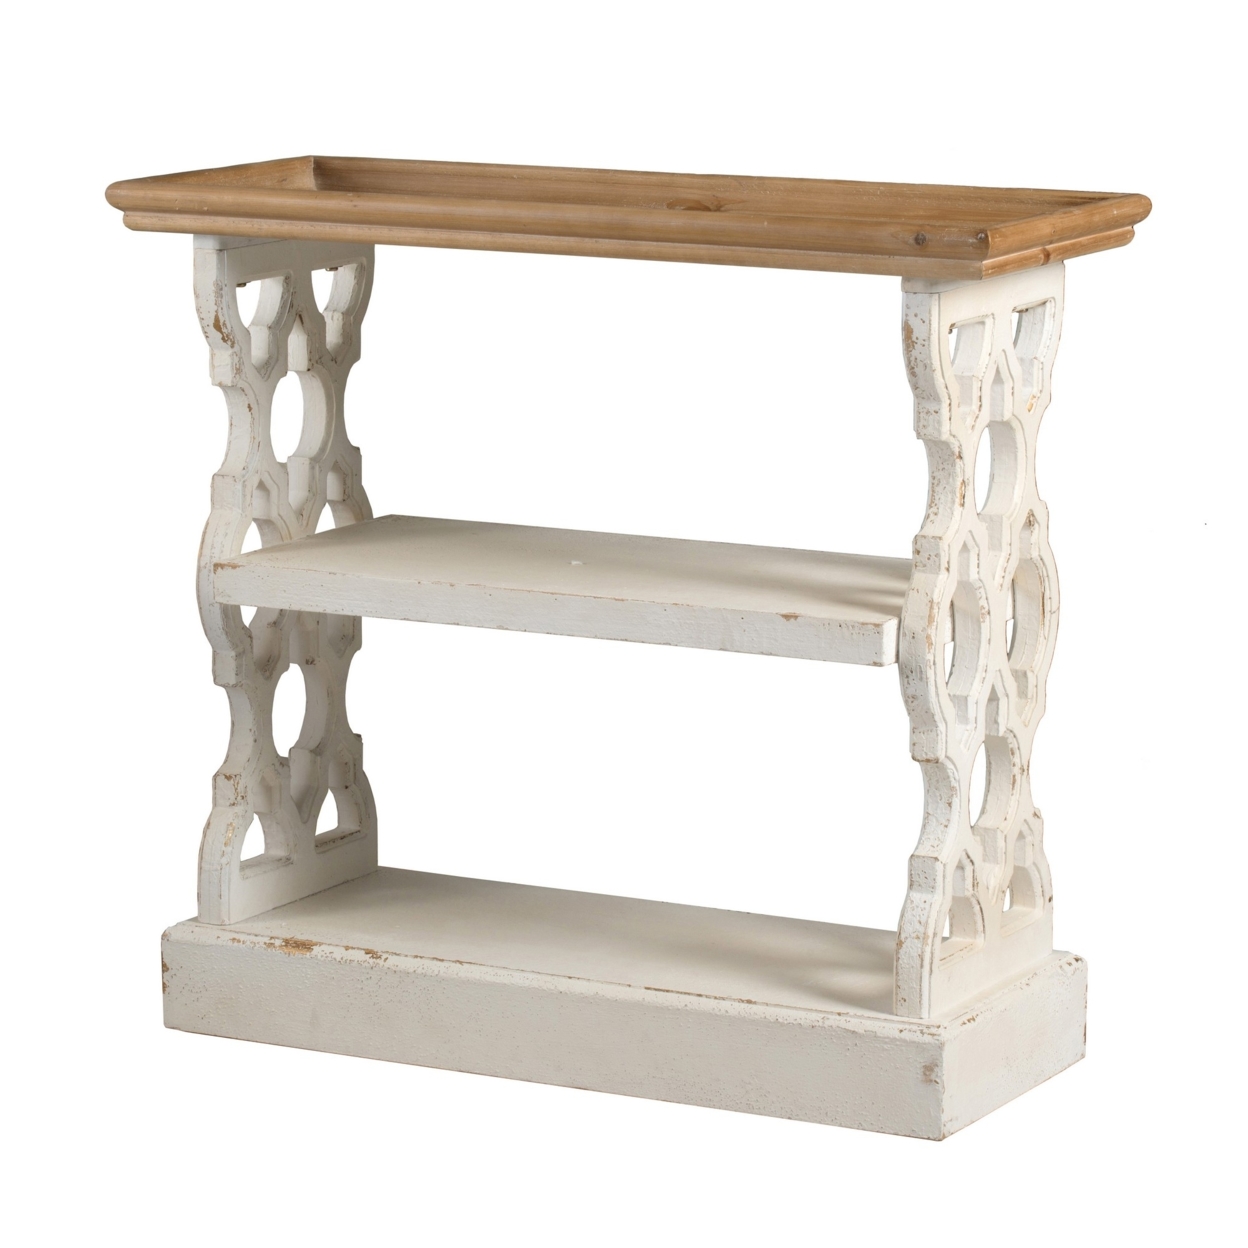 35 Inch 3 Tier Console Table, Fir Wood, Carved Panels, Brown And White- Saltoro Sherpi